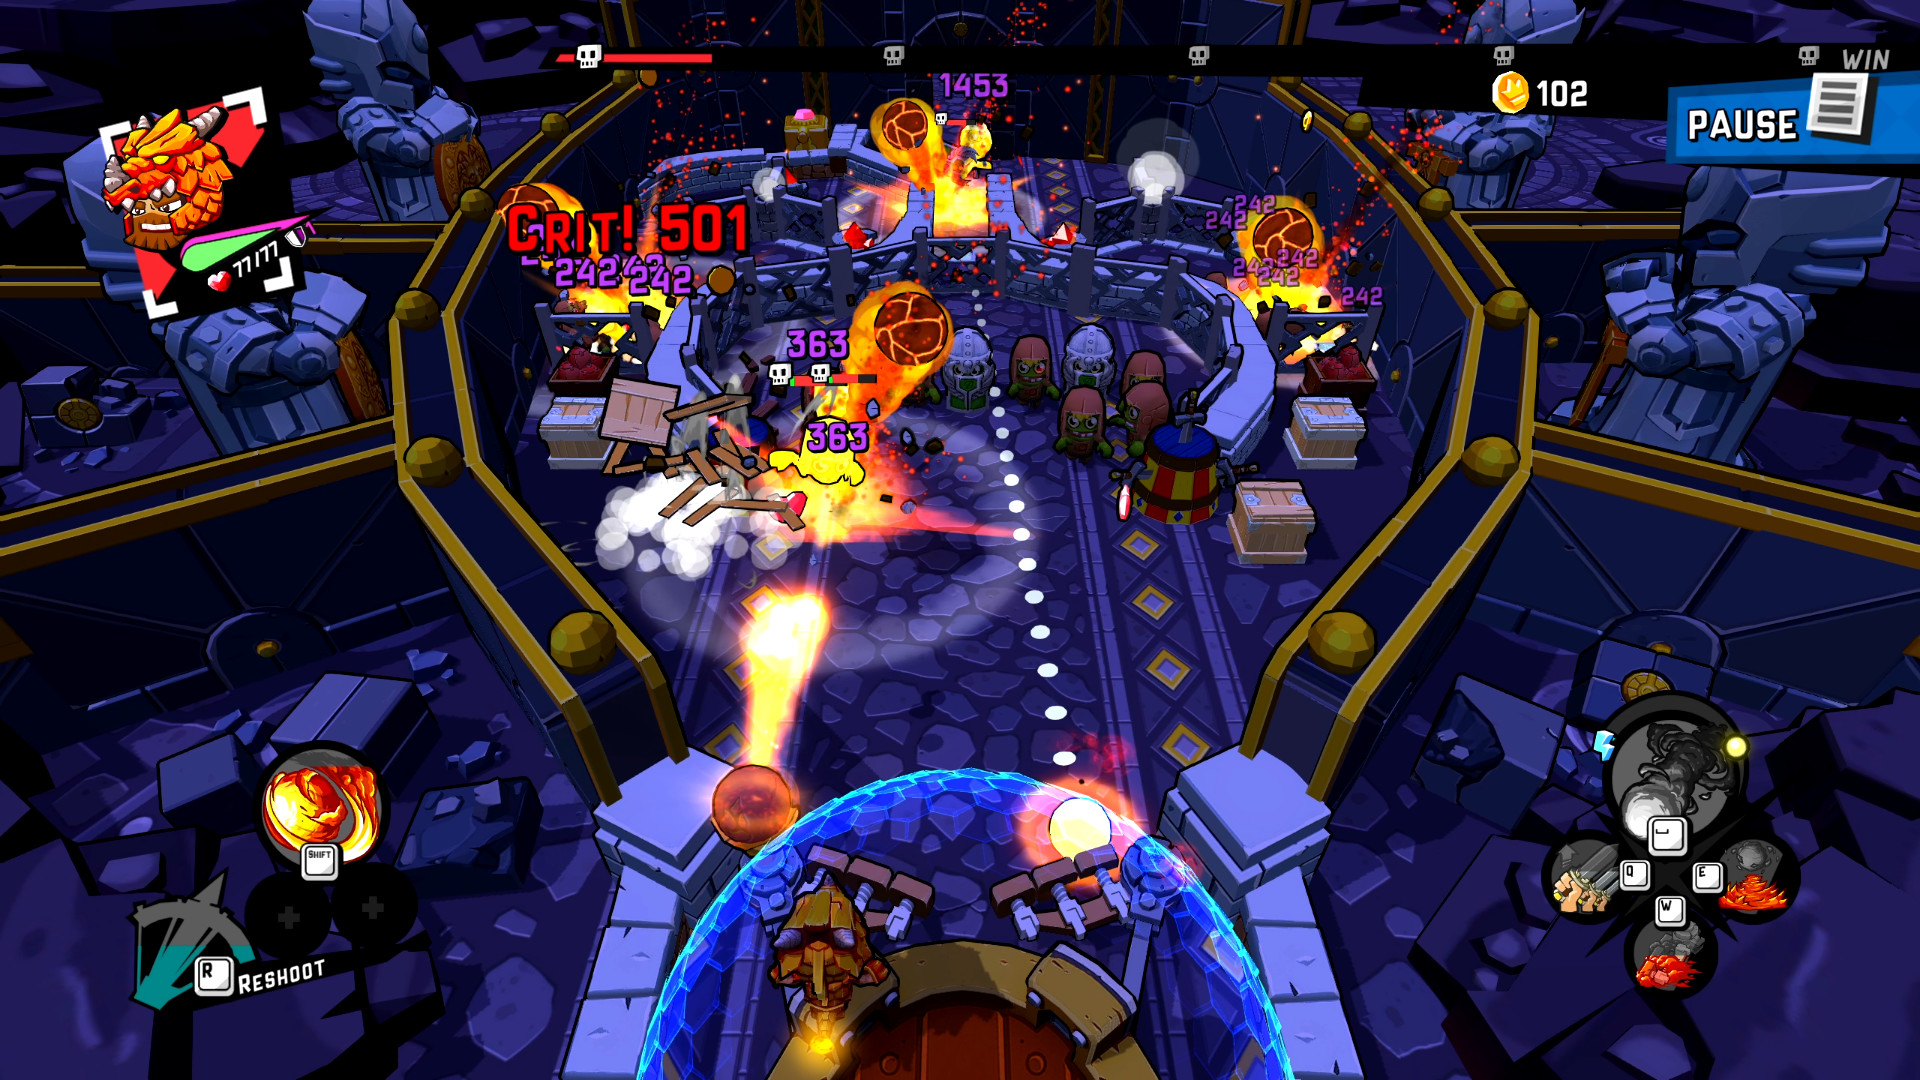 Zombie Rollerz: Pinball Heroes Free Download